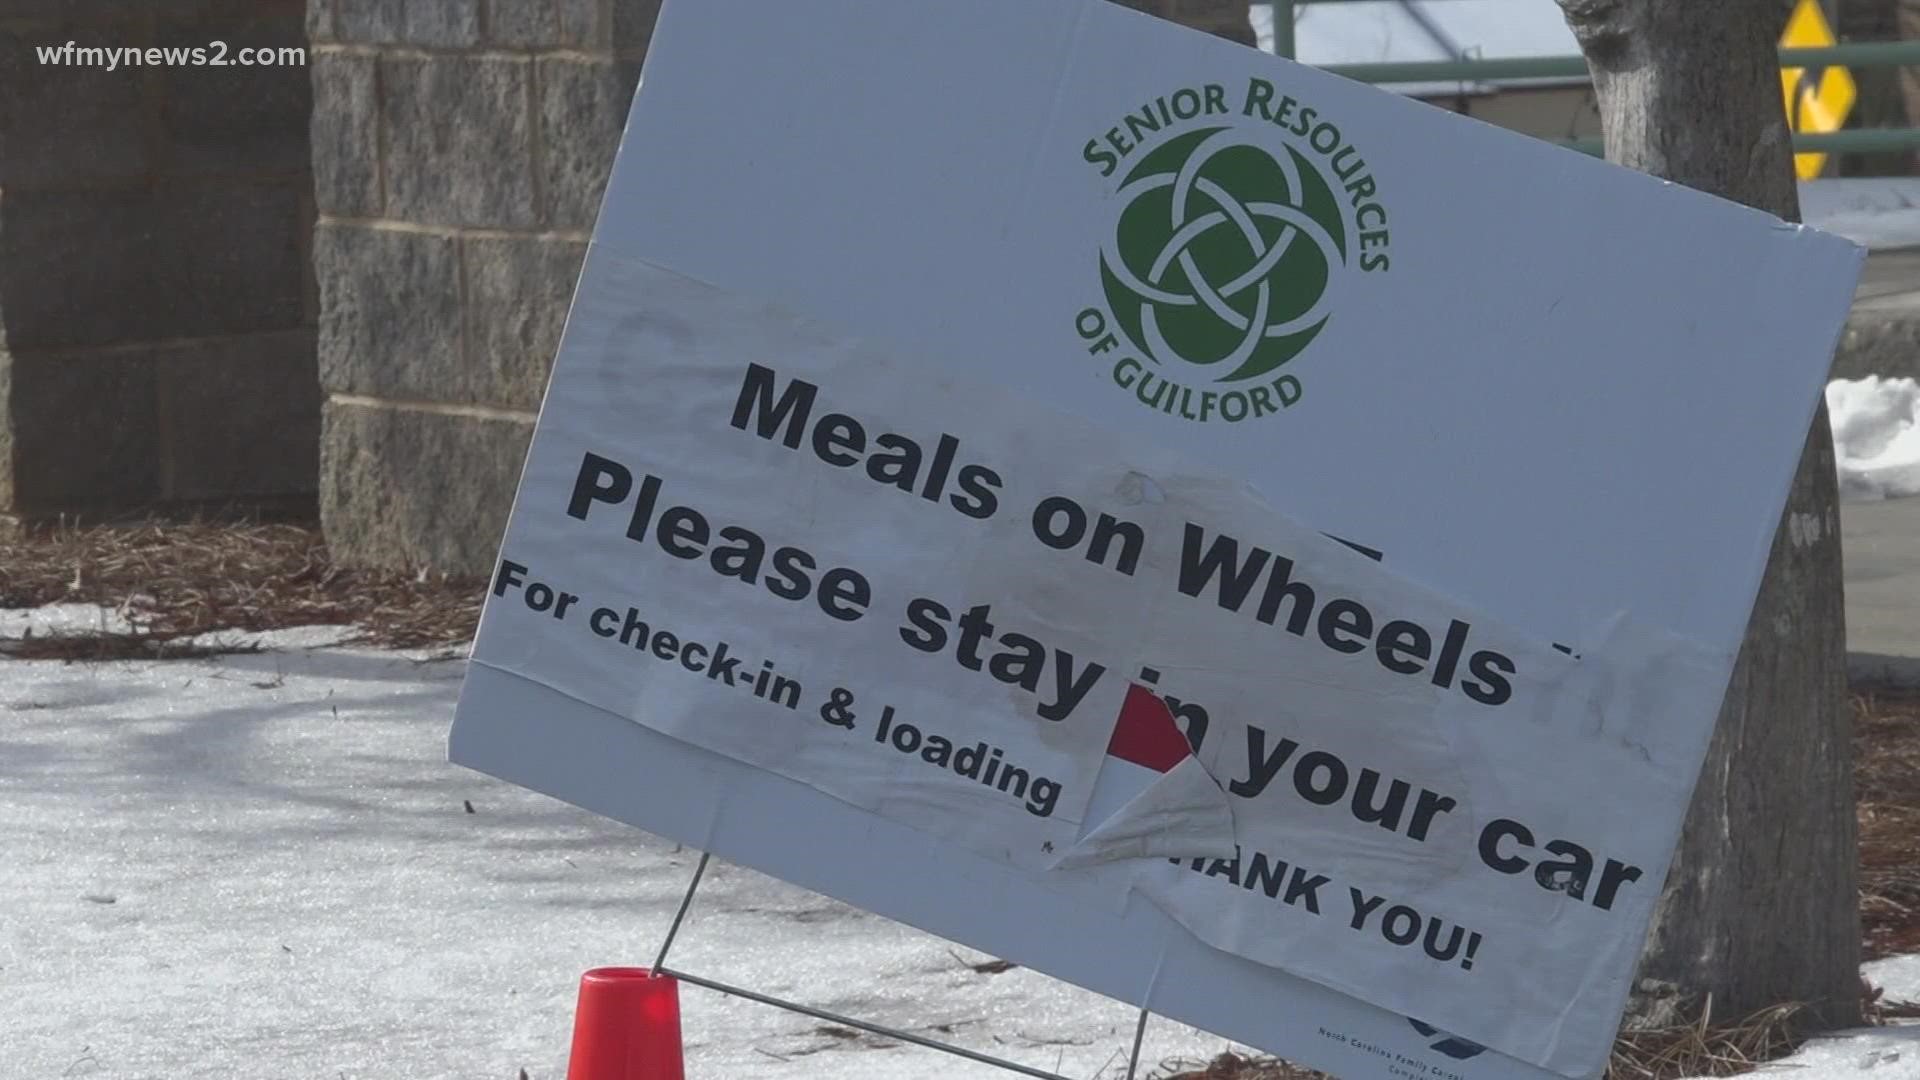 Meals-on-Wheels delivers shelf stable meals to clients in the event of bad weather that could prevent volunteers from reaching seniors.